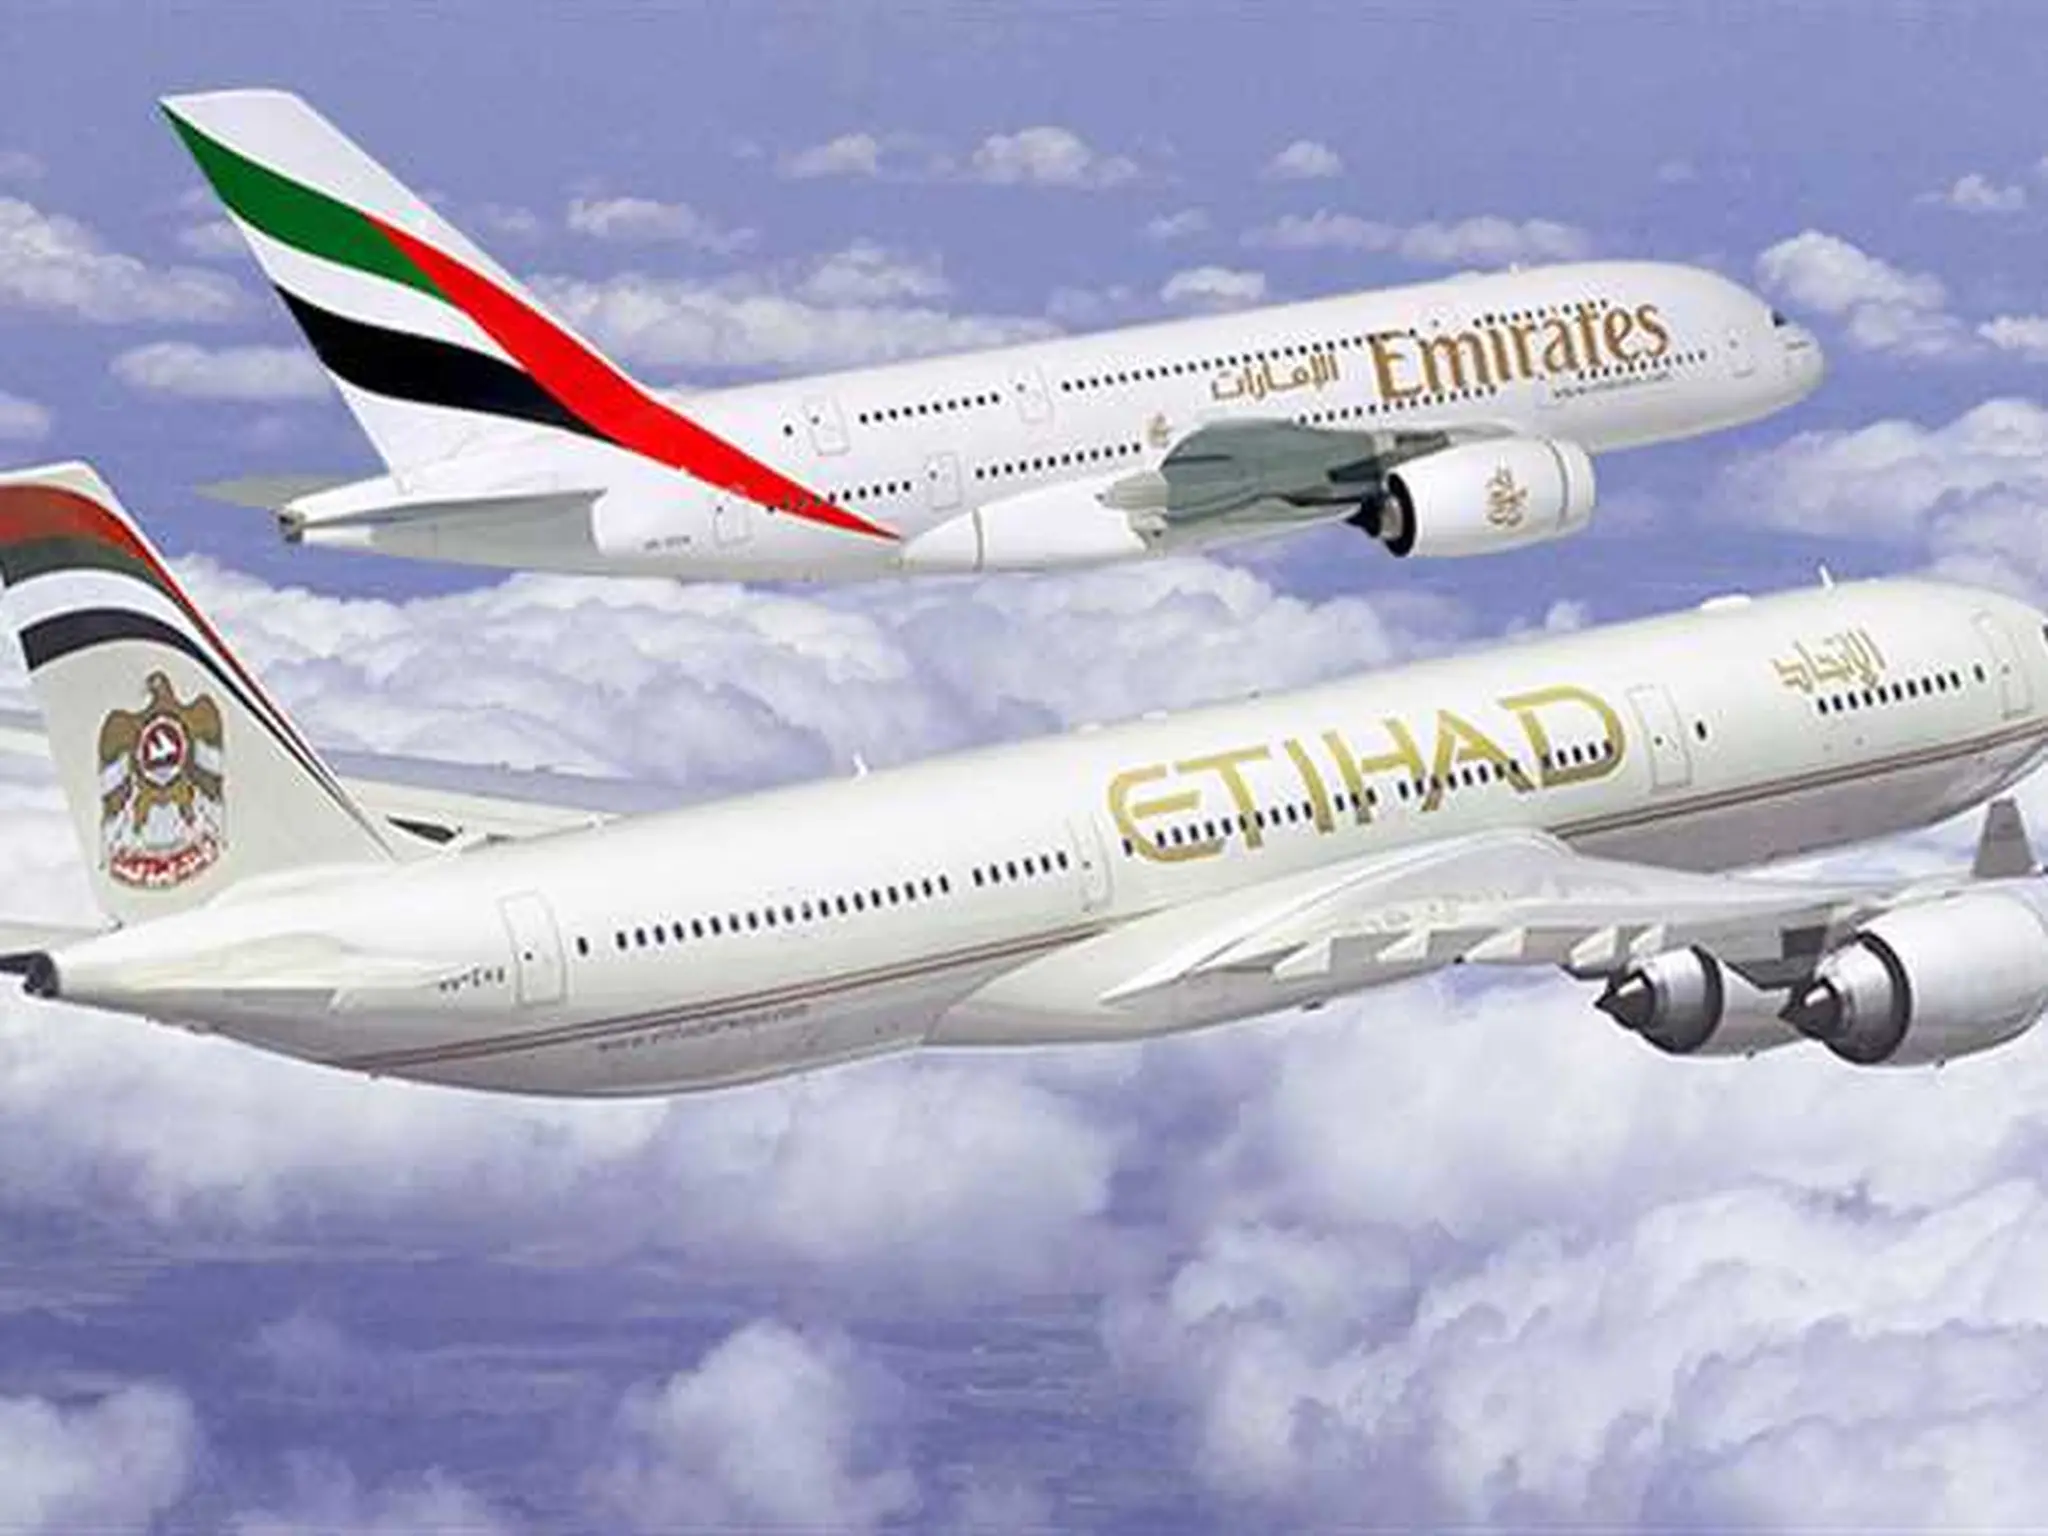 Etihad Airlines signs an agreement to assist passengers